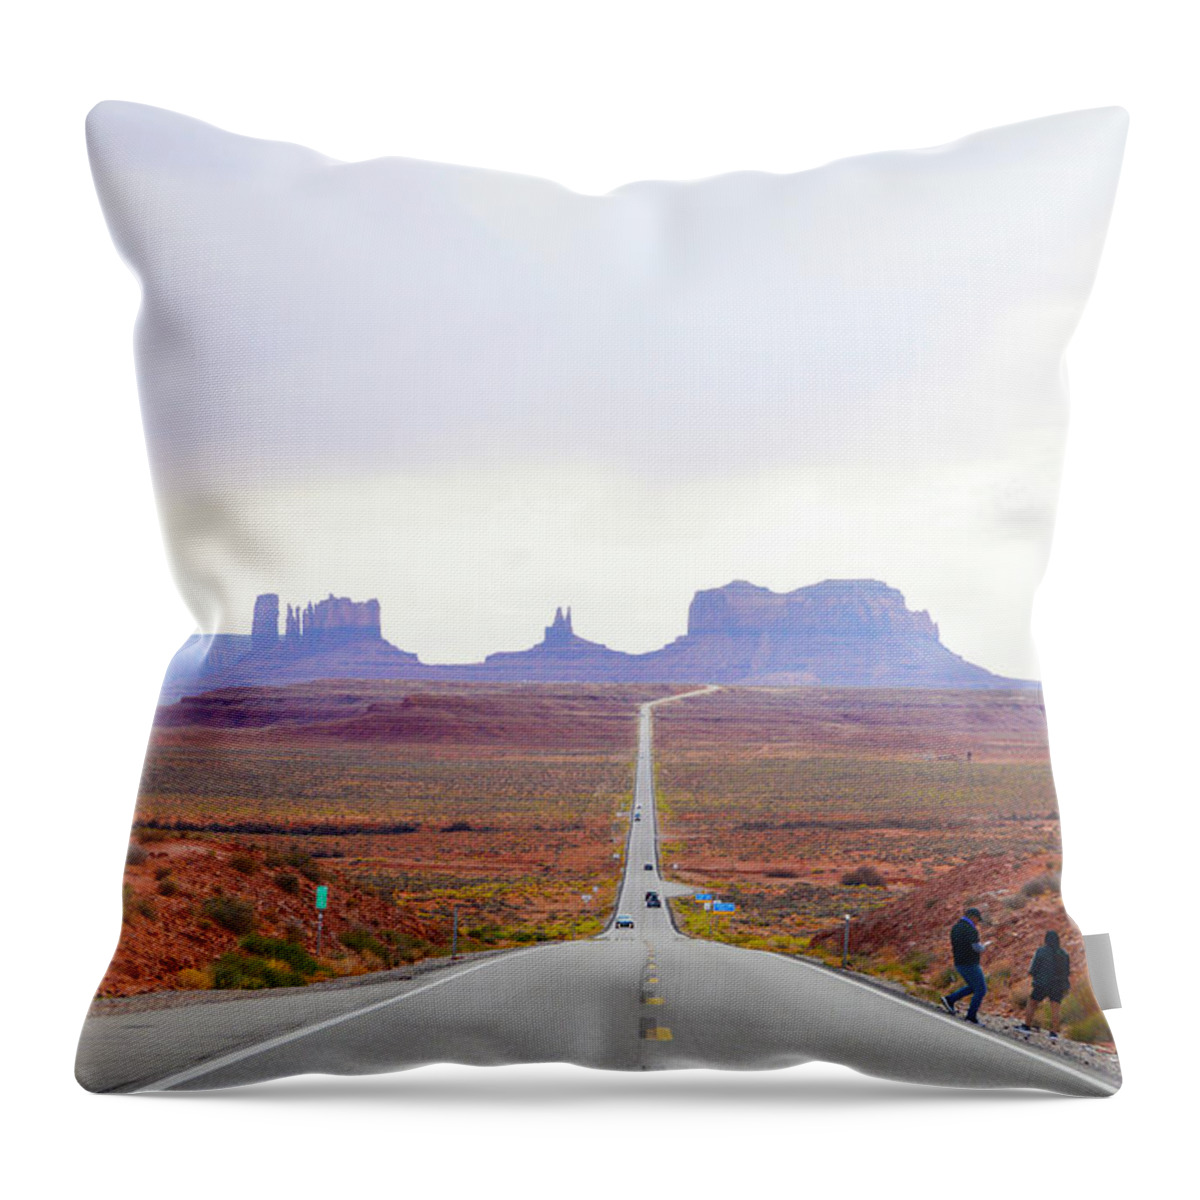 Monuments Throw Pillow featuring the photograph Monumental by Brian O'Kelly